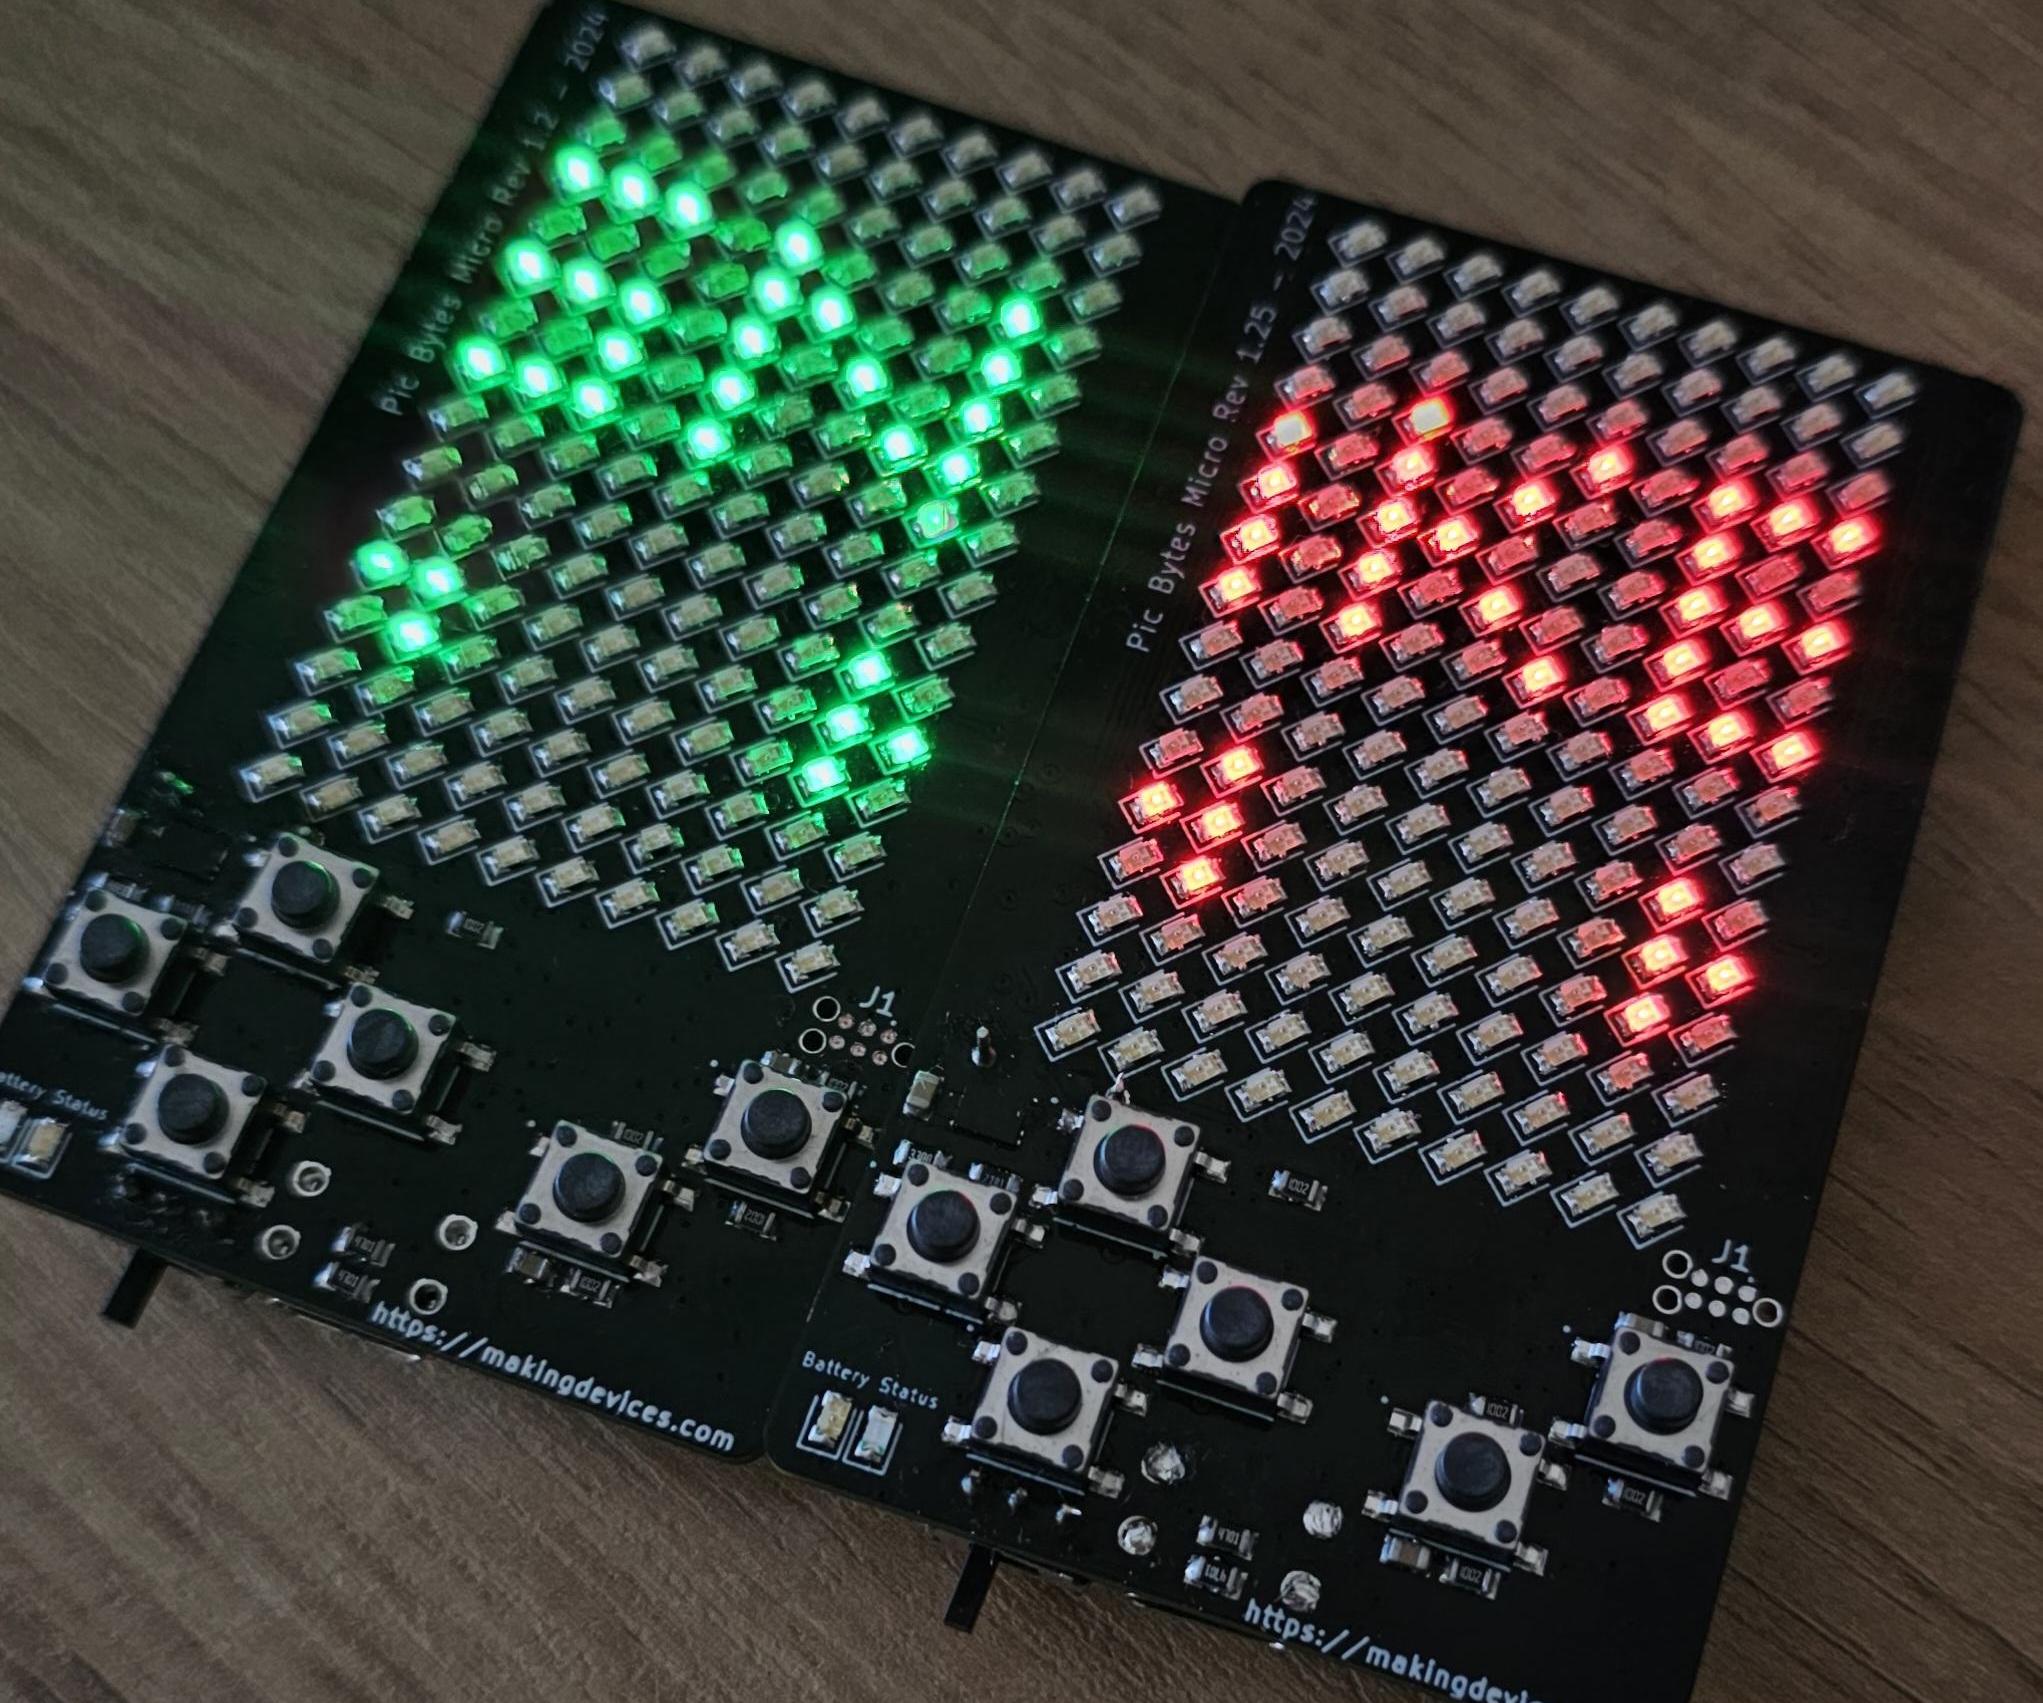 8-bit Videoconsole With a LED Matrix As Screen